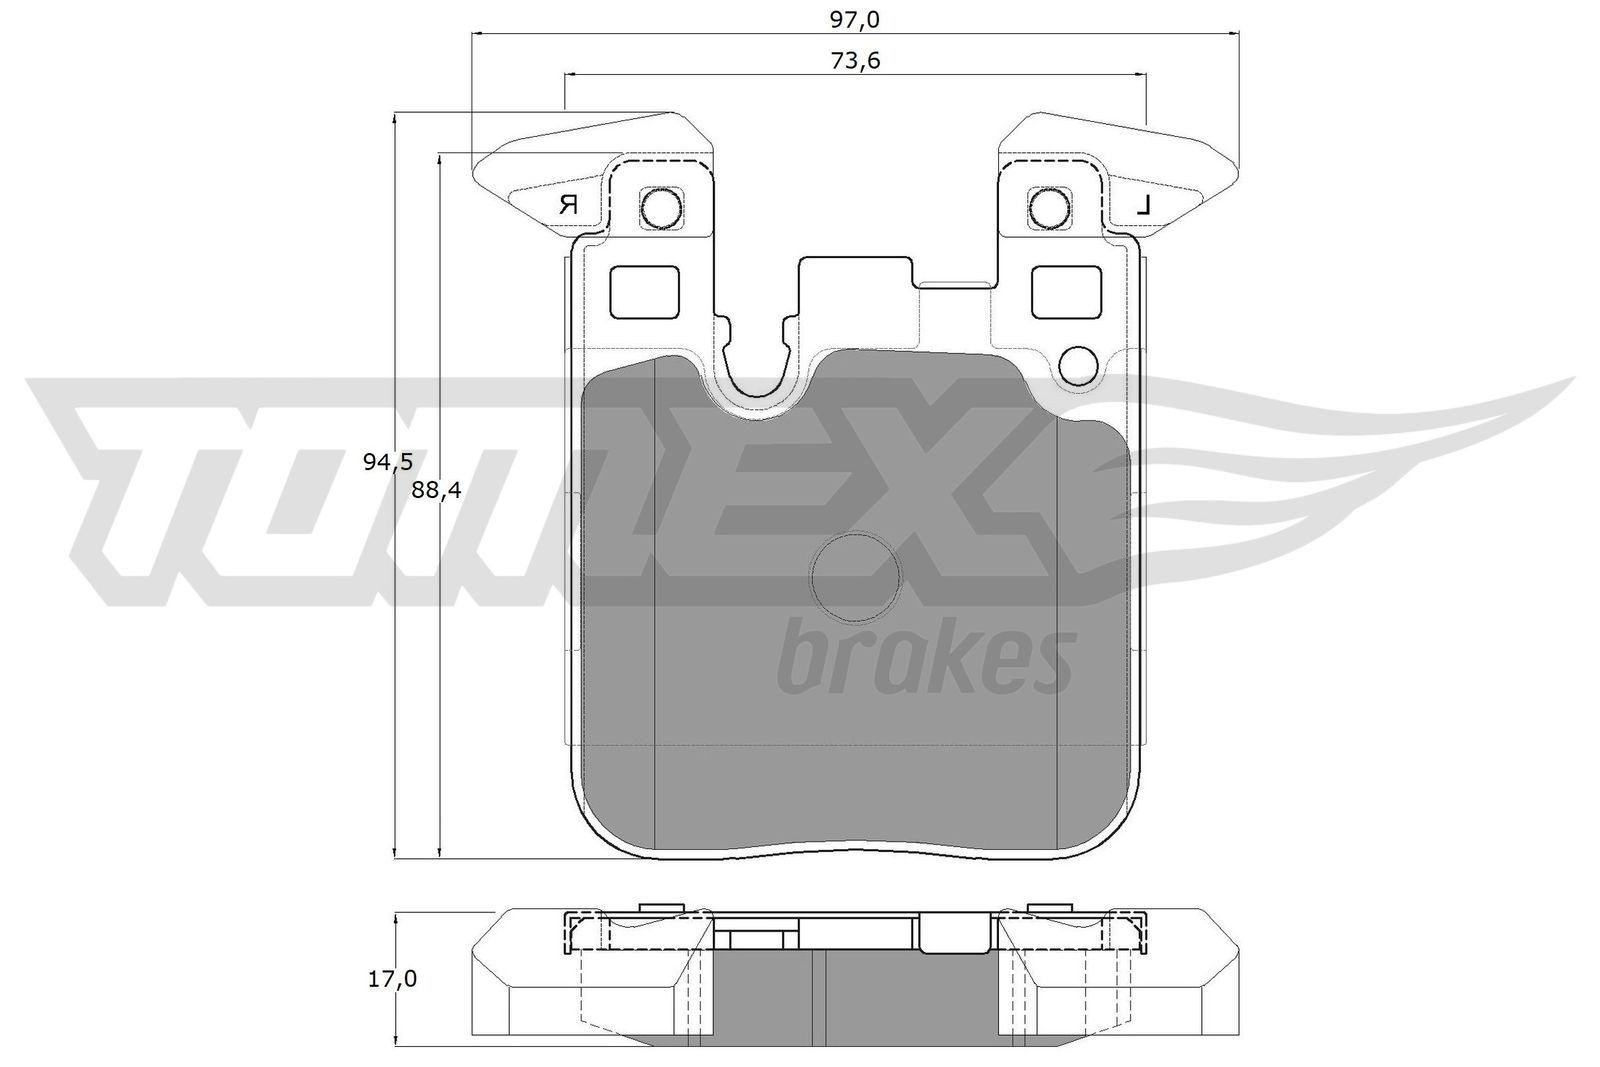 18-47 TOMEX brakes Rear Axle, prepared for wear indicator, with counterweights Height: 94,5mm, Width: 73,6mm, Thickness: 17mm Brake pads TX 18-47 buy